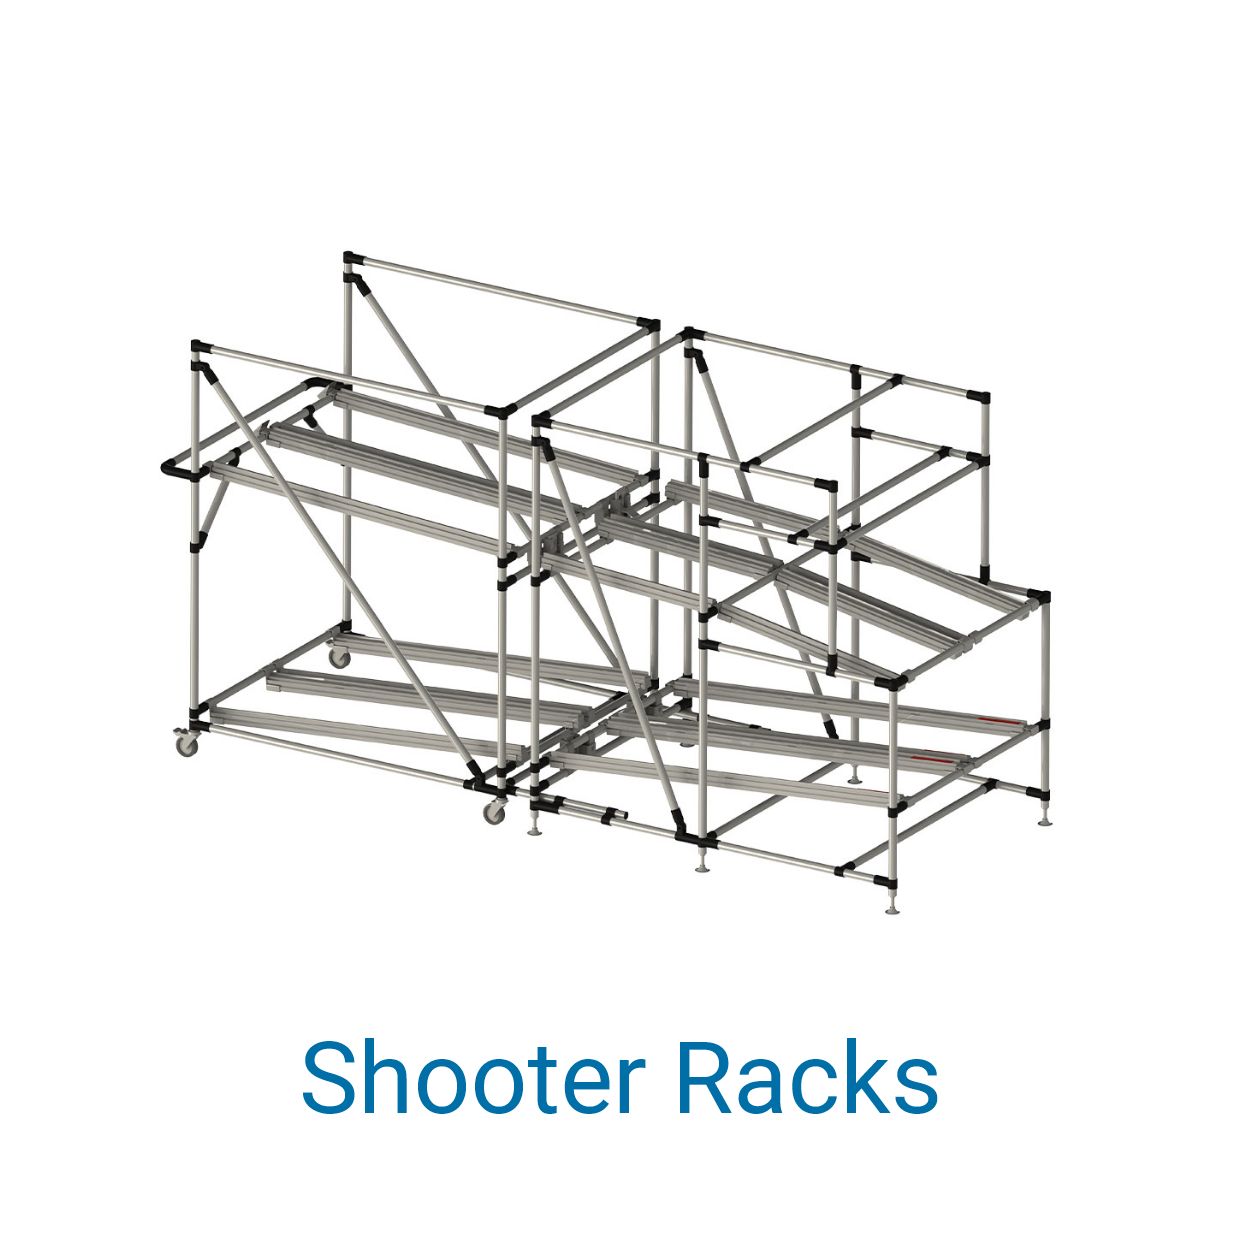 Rendering of a shooter rack from BeeWaTec 